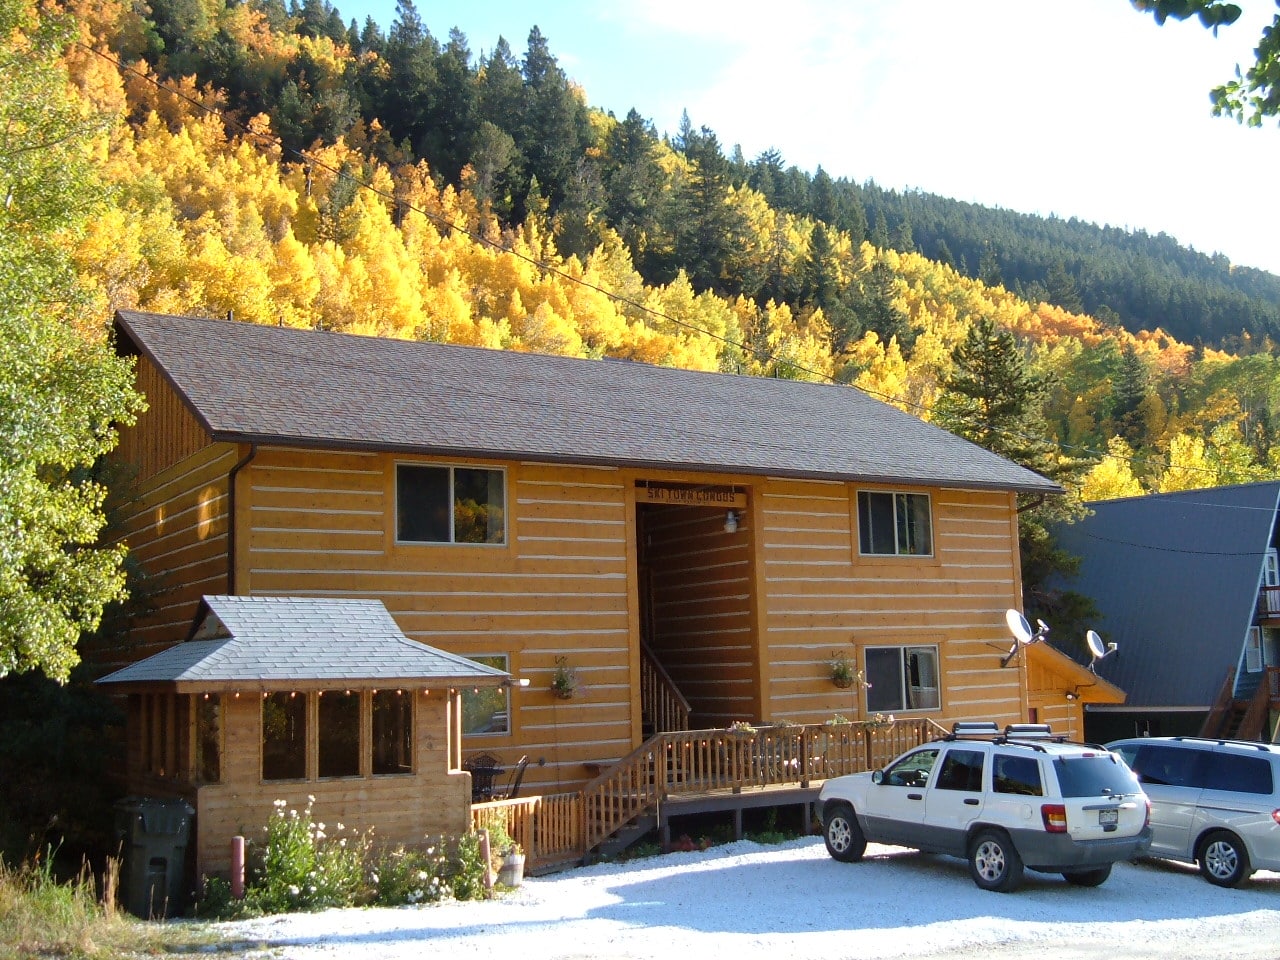 Sunny fall day, autumn gold log sided condos with mountain views all around.